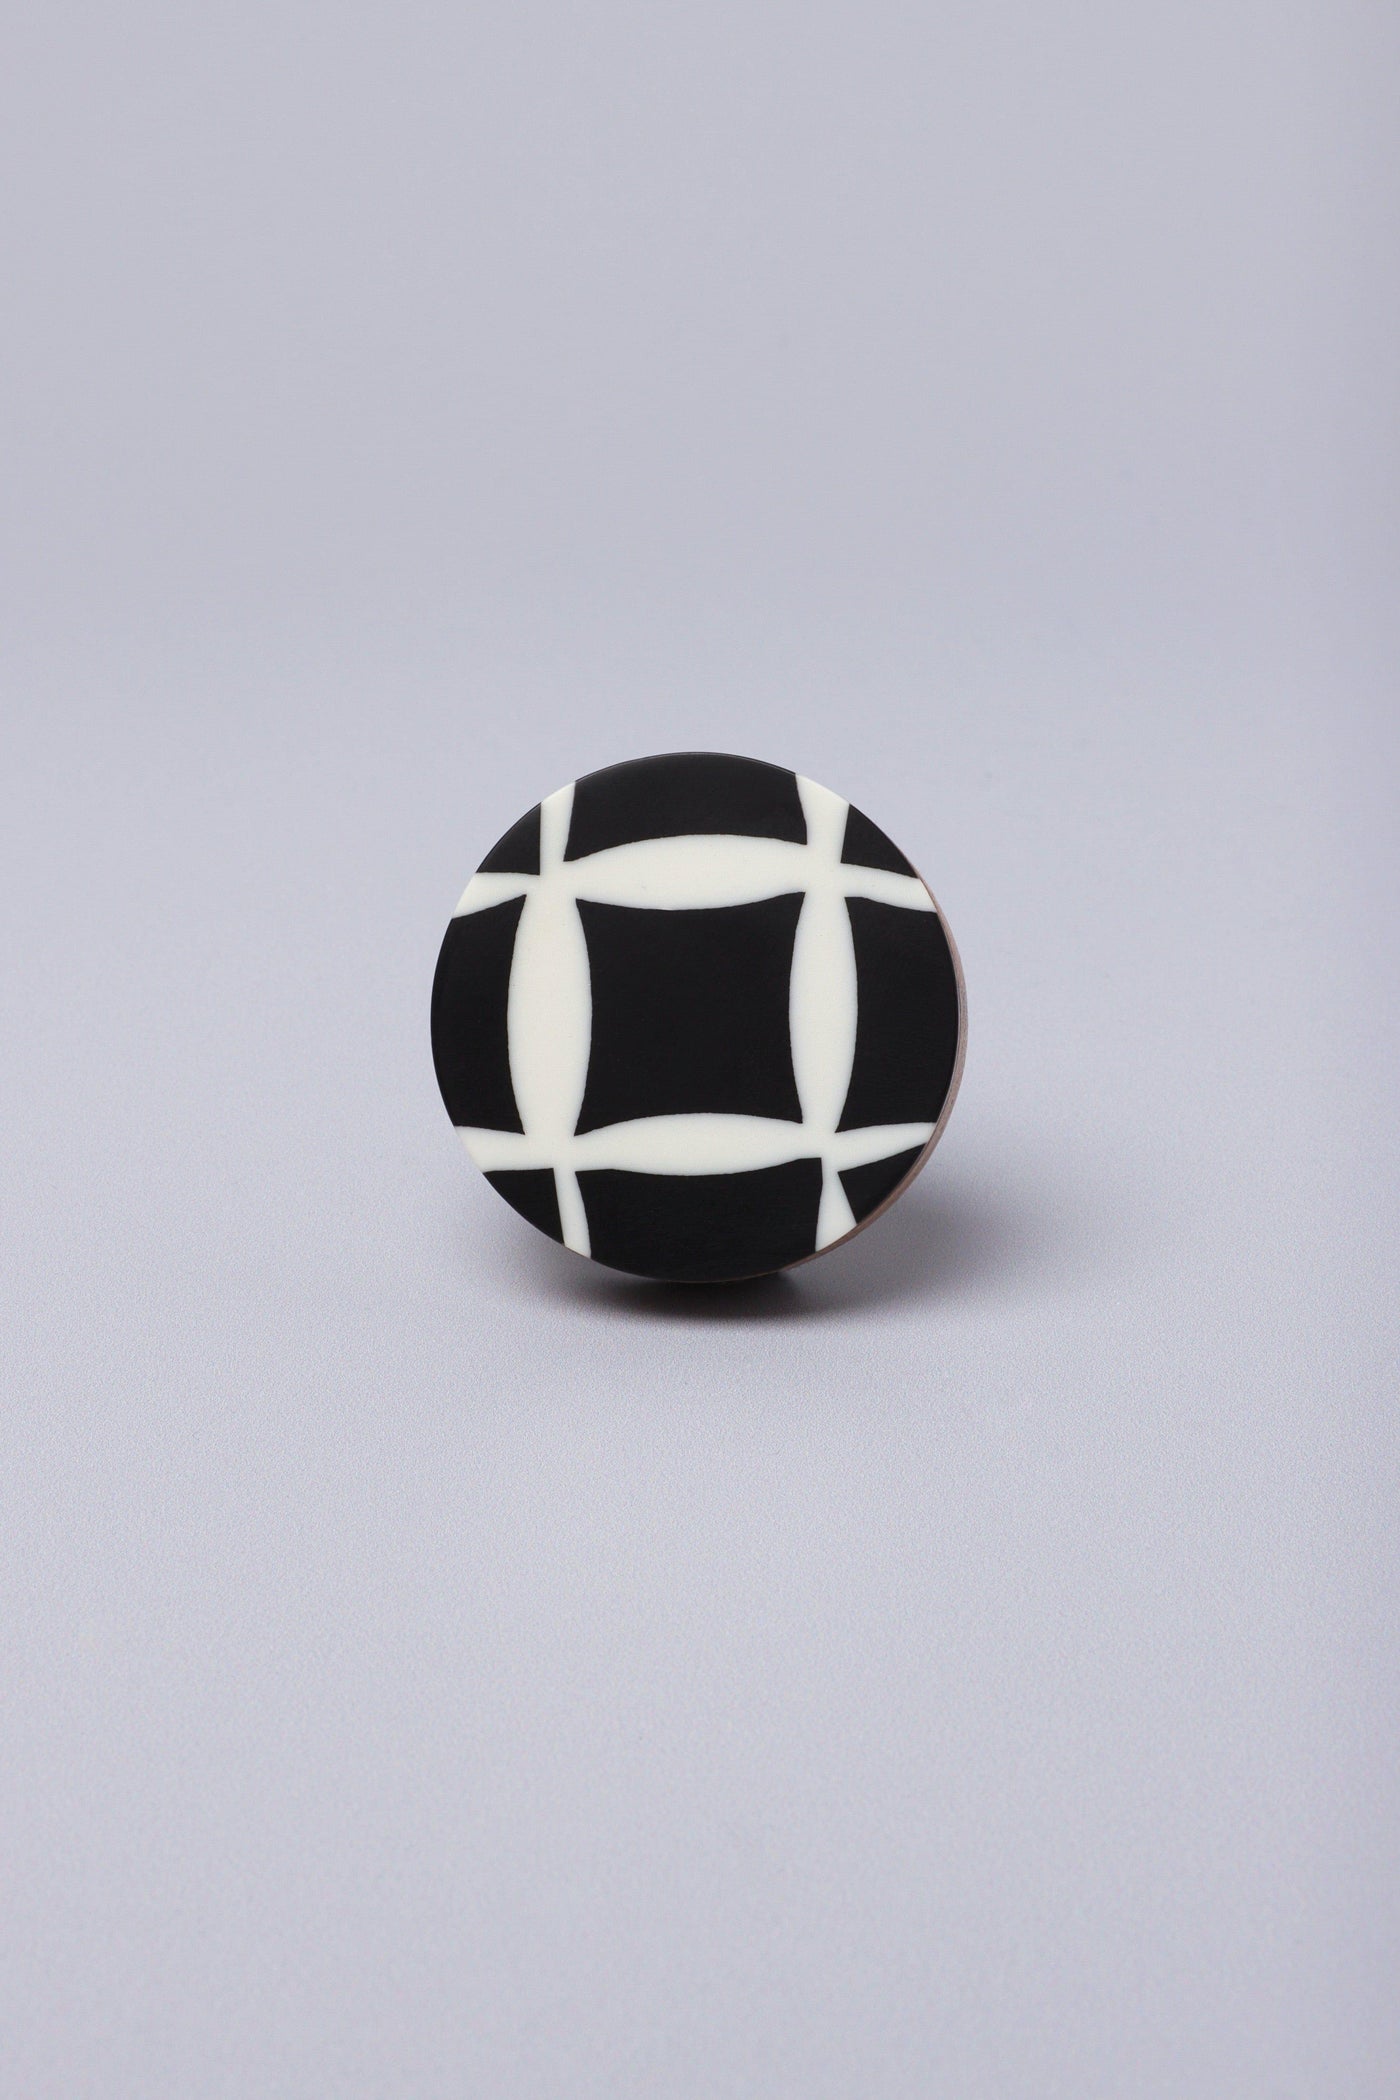 Gdecorstore Door Knobs & Handles Black Dizzy Chequered Resin And Wood Handles Knobs